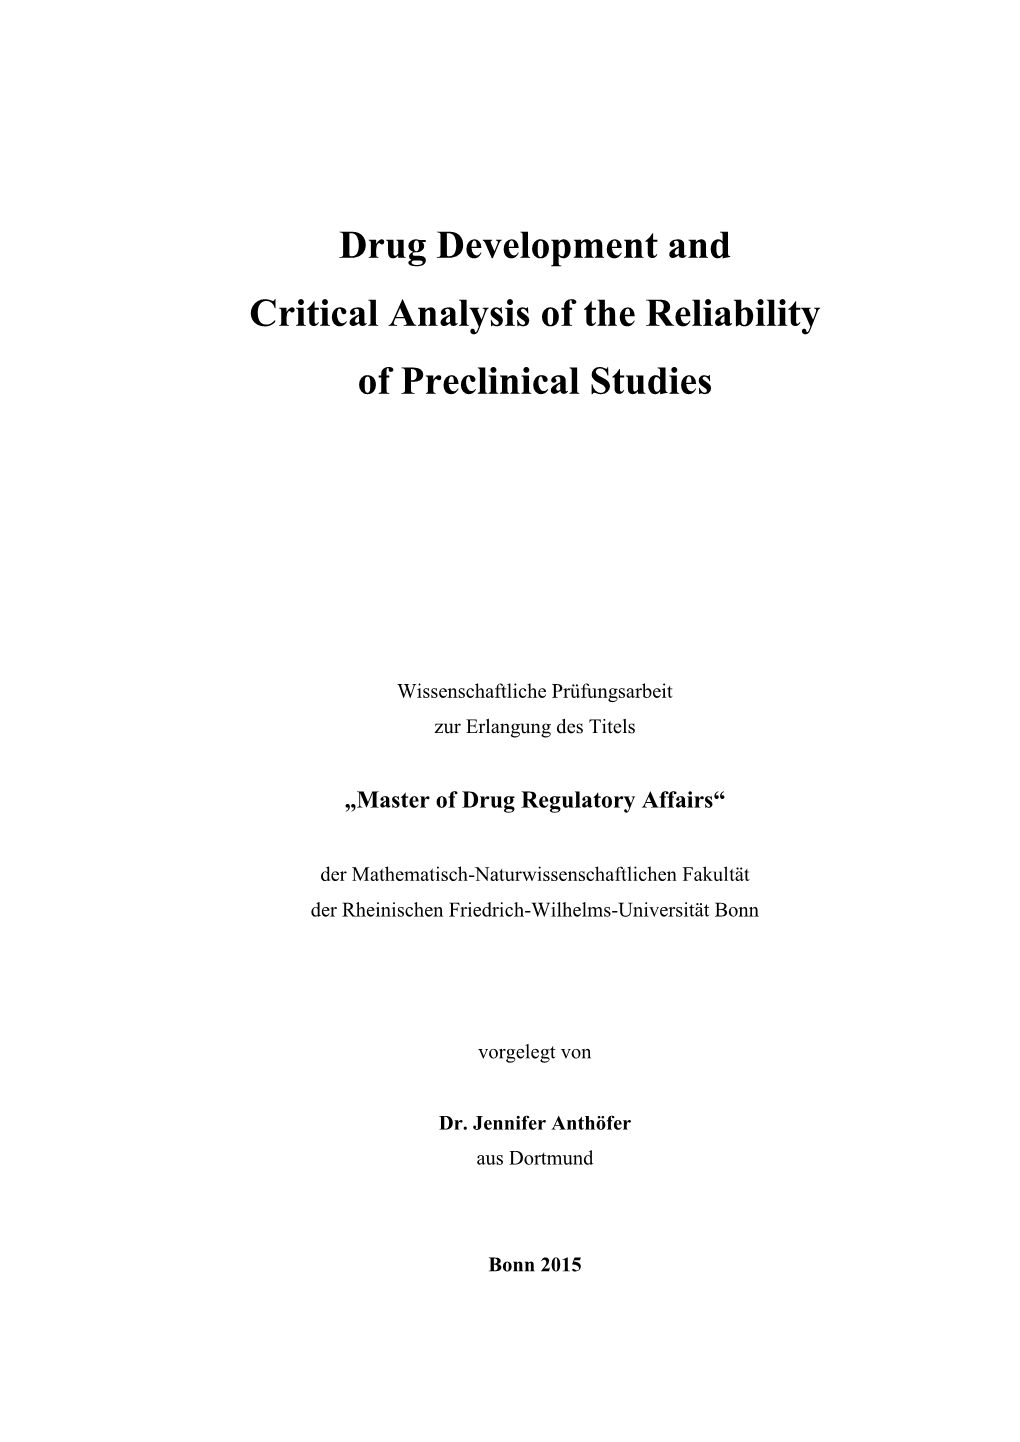 Drug Development and Critical Analysis of the Reliability of Preclinical Studies